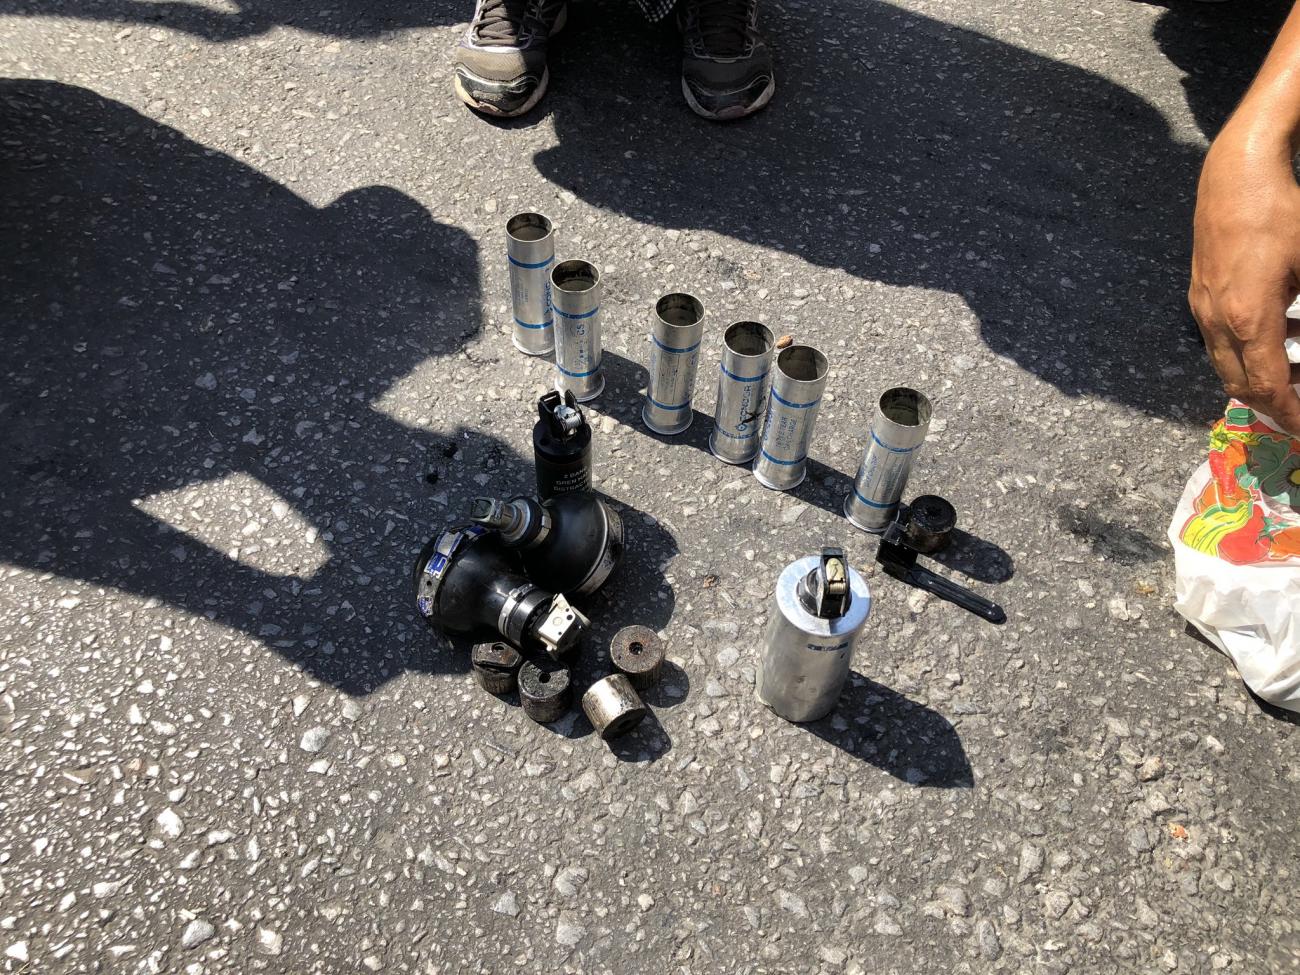 Around a dozen spent tear gas canisters and grenades displayed on the street